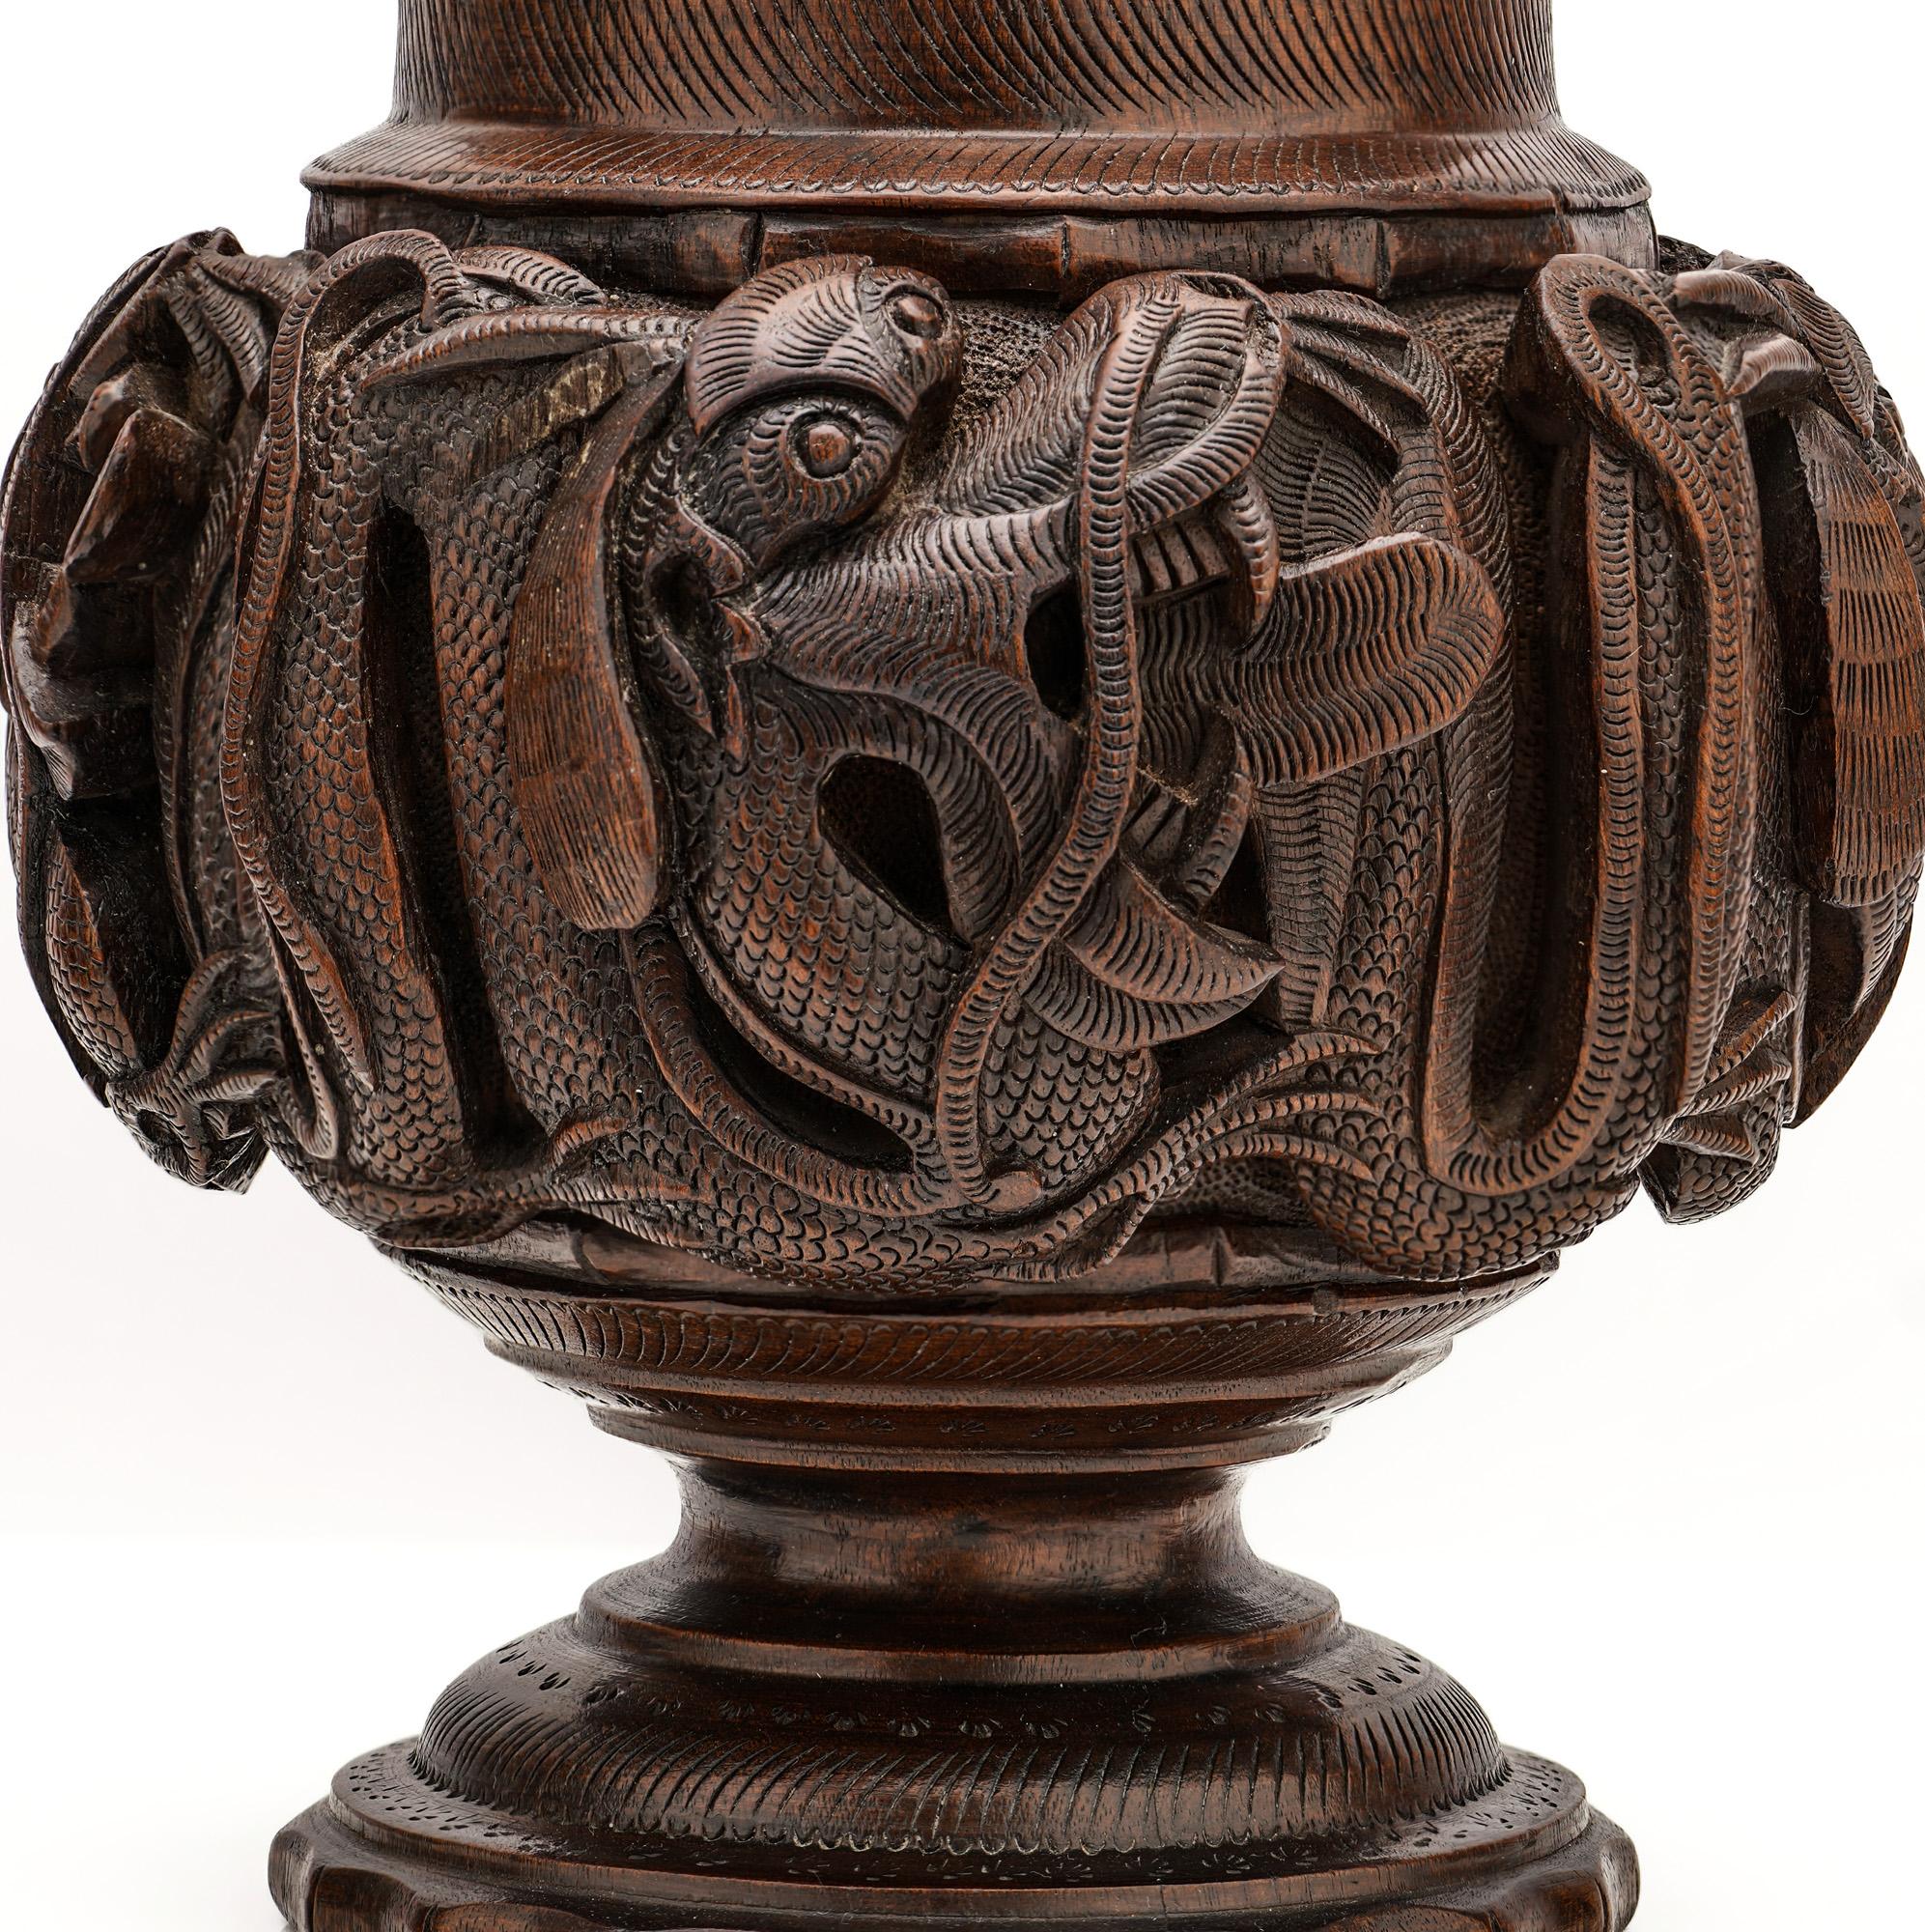 Indochina First Half of 20th Century Carved Wood Caddy with a Dragon Carvings For Sale 1